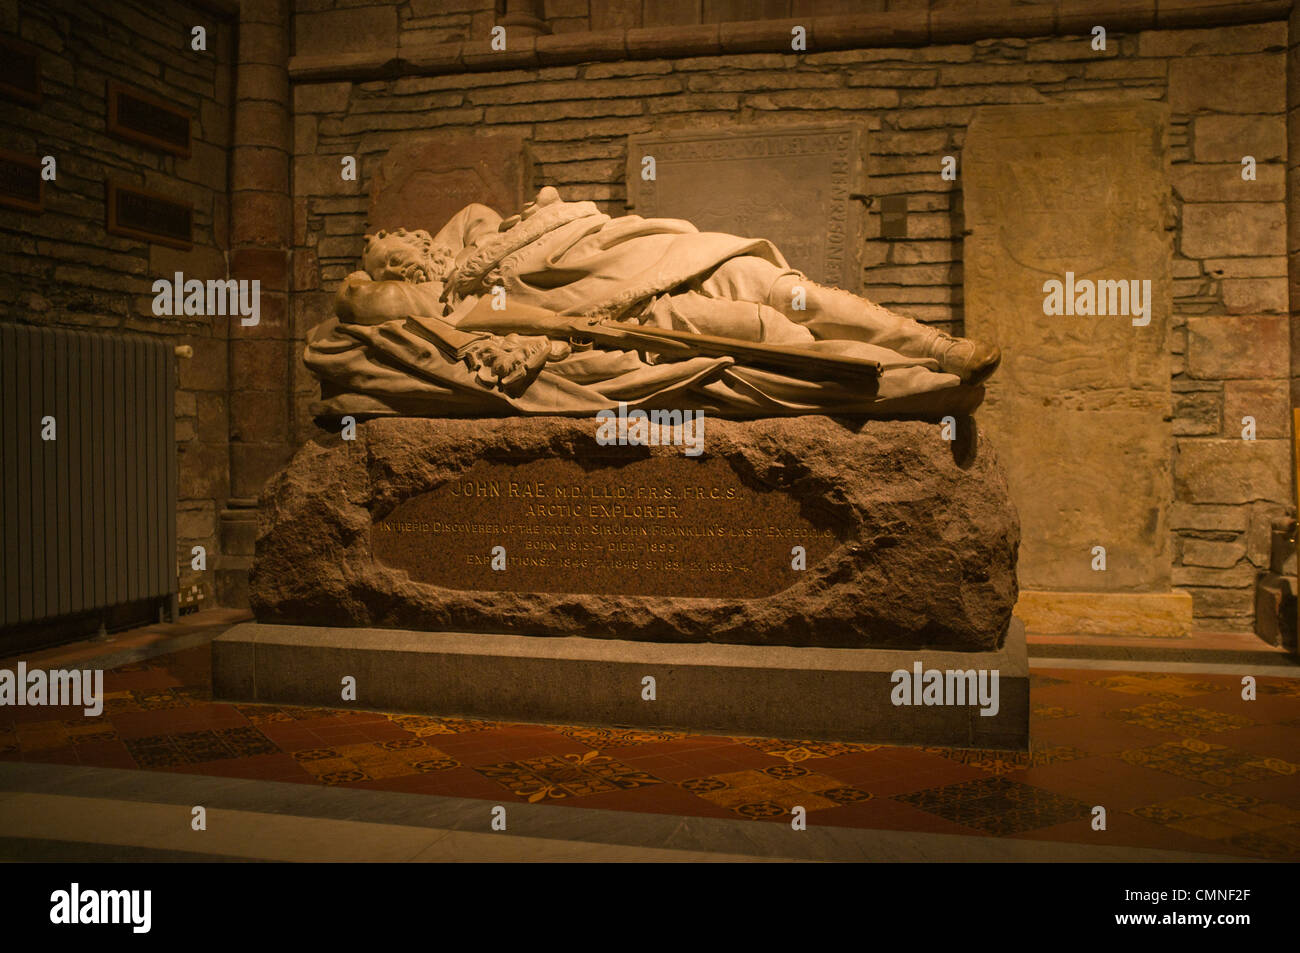 dh St Magnus Cathedral KIRKWALL ORKNEY John Raes Orcadian Arctic Explorer tomb inside cathedral grave dr rae explorers Stock Photo